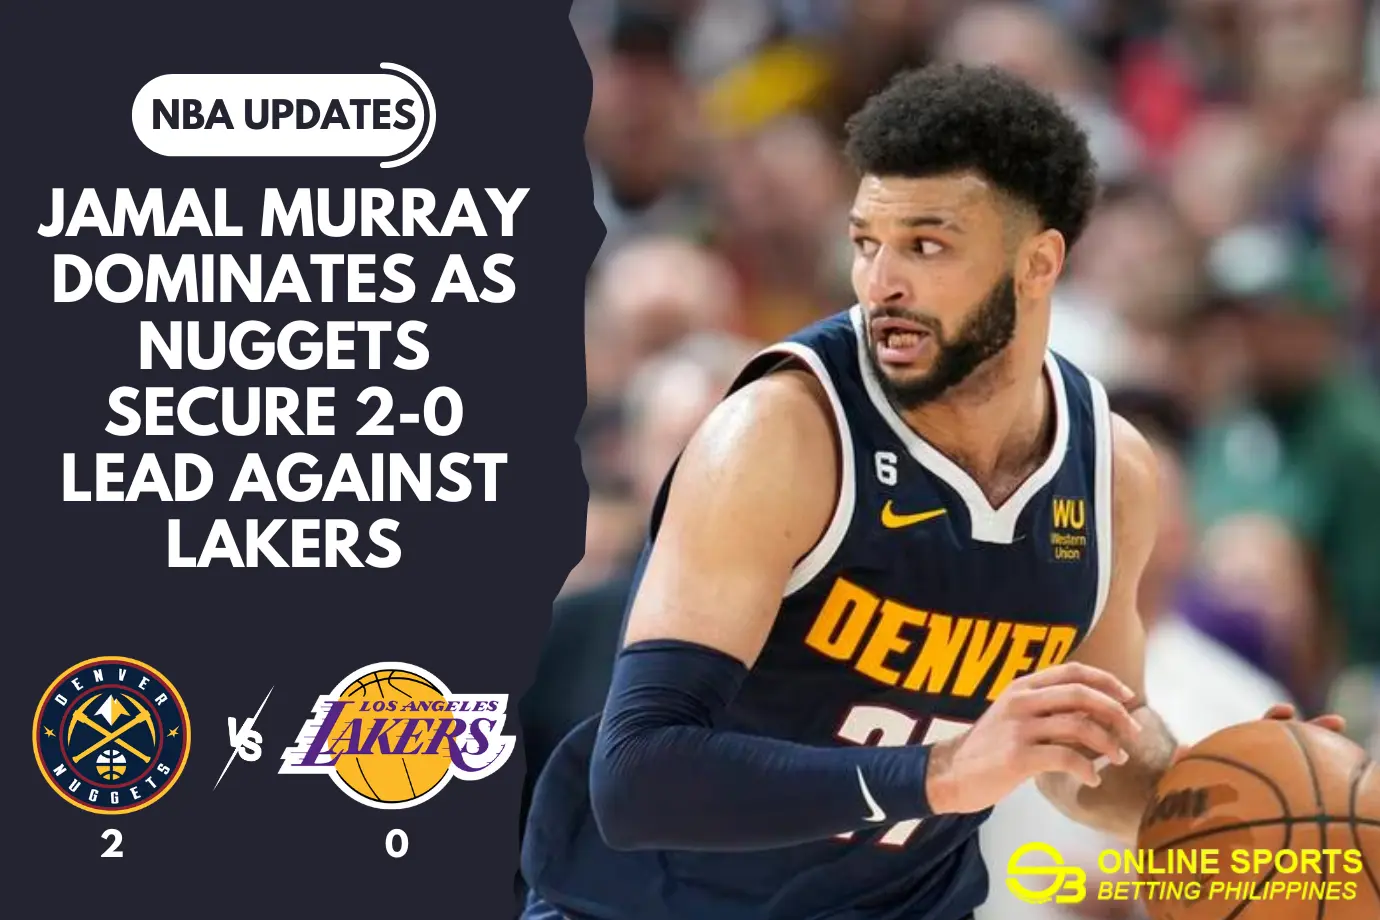 Jamal Murray Dominates as Nuggets Secure 2-0 Lead against Lakers